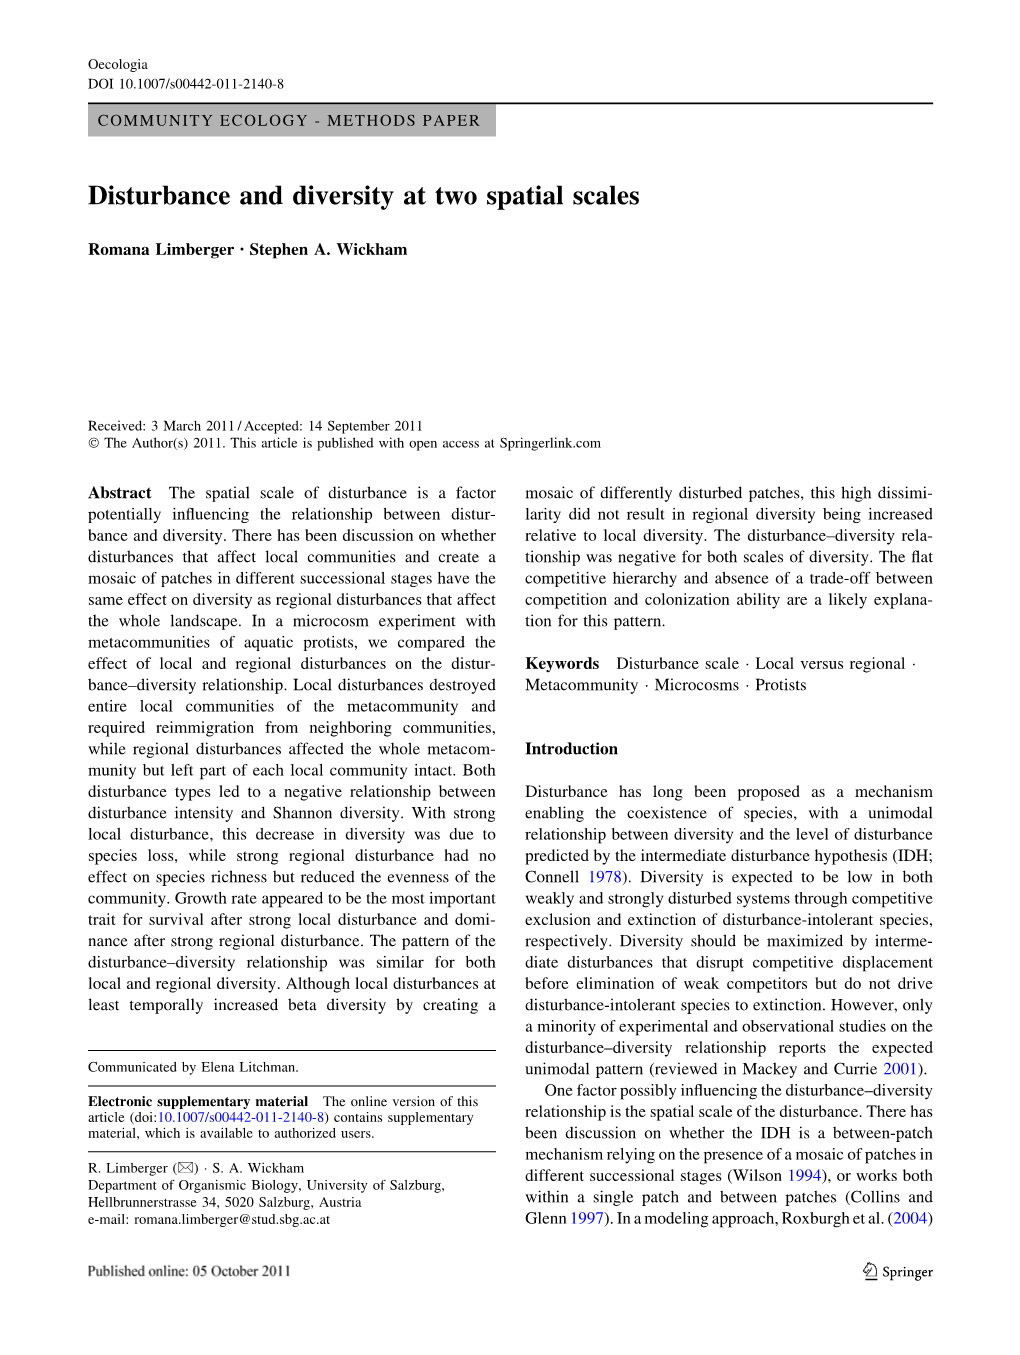 Disturbance and Diversity at Two Spatial Scales